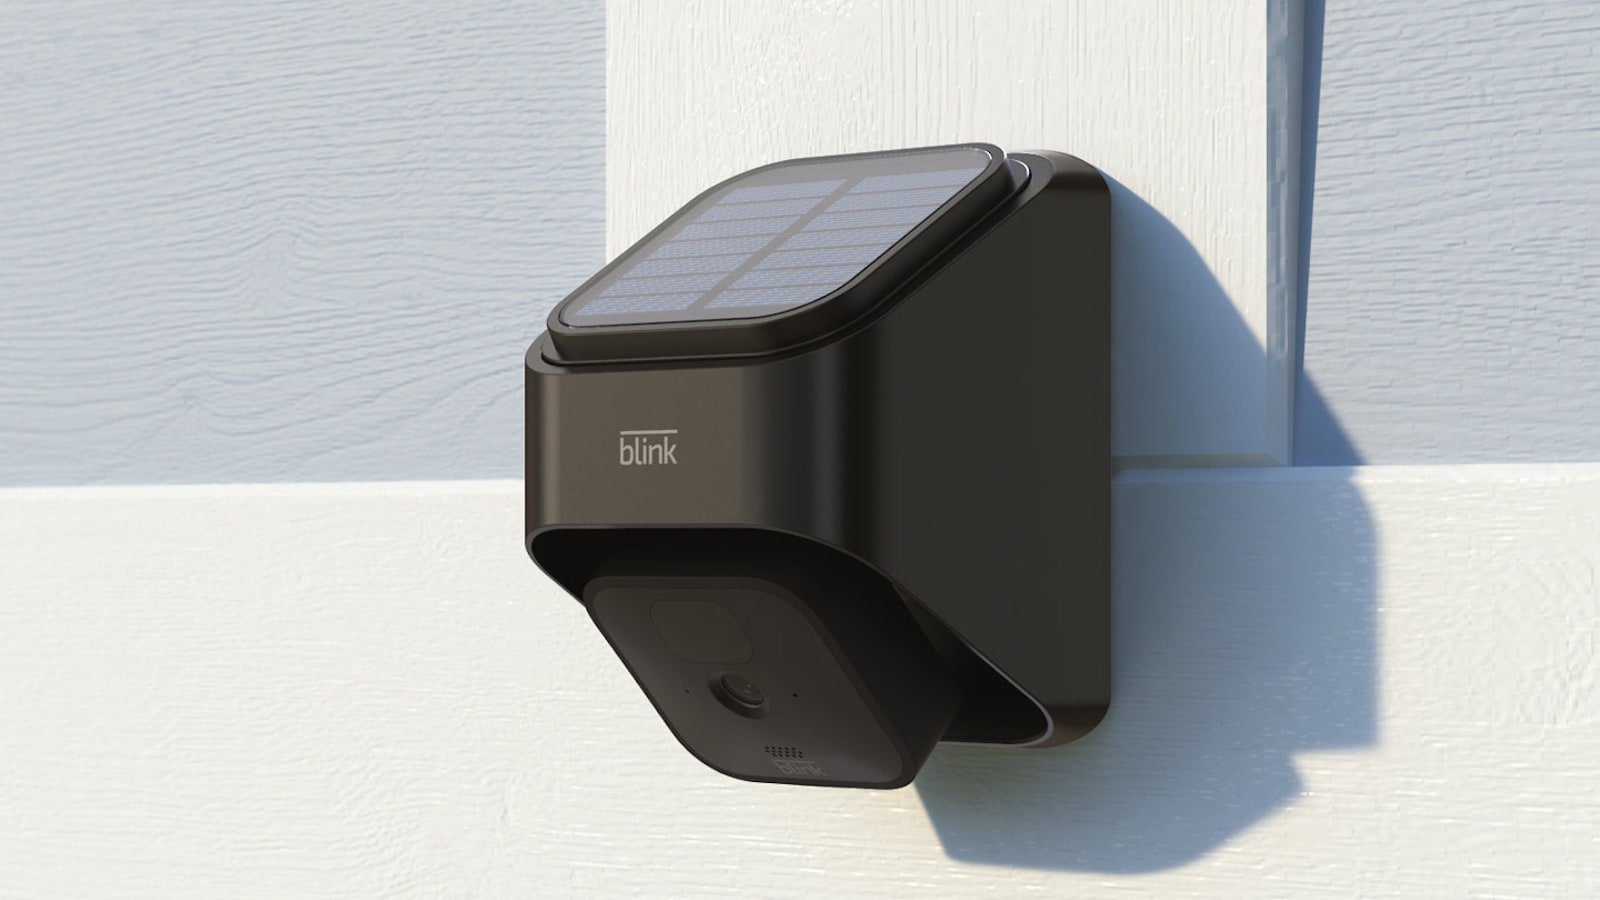 Blink Solar Panel Charging Mount uses the sun’s power to charge the Blink Outdoor